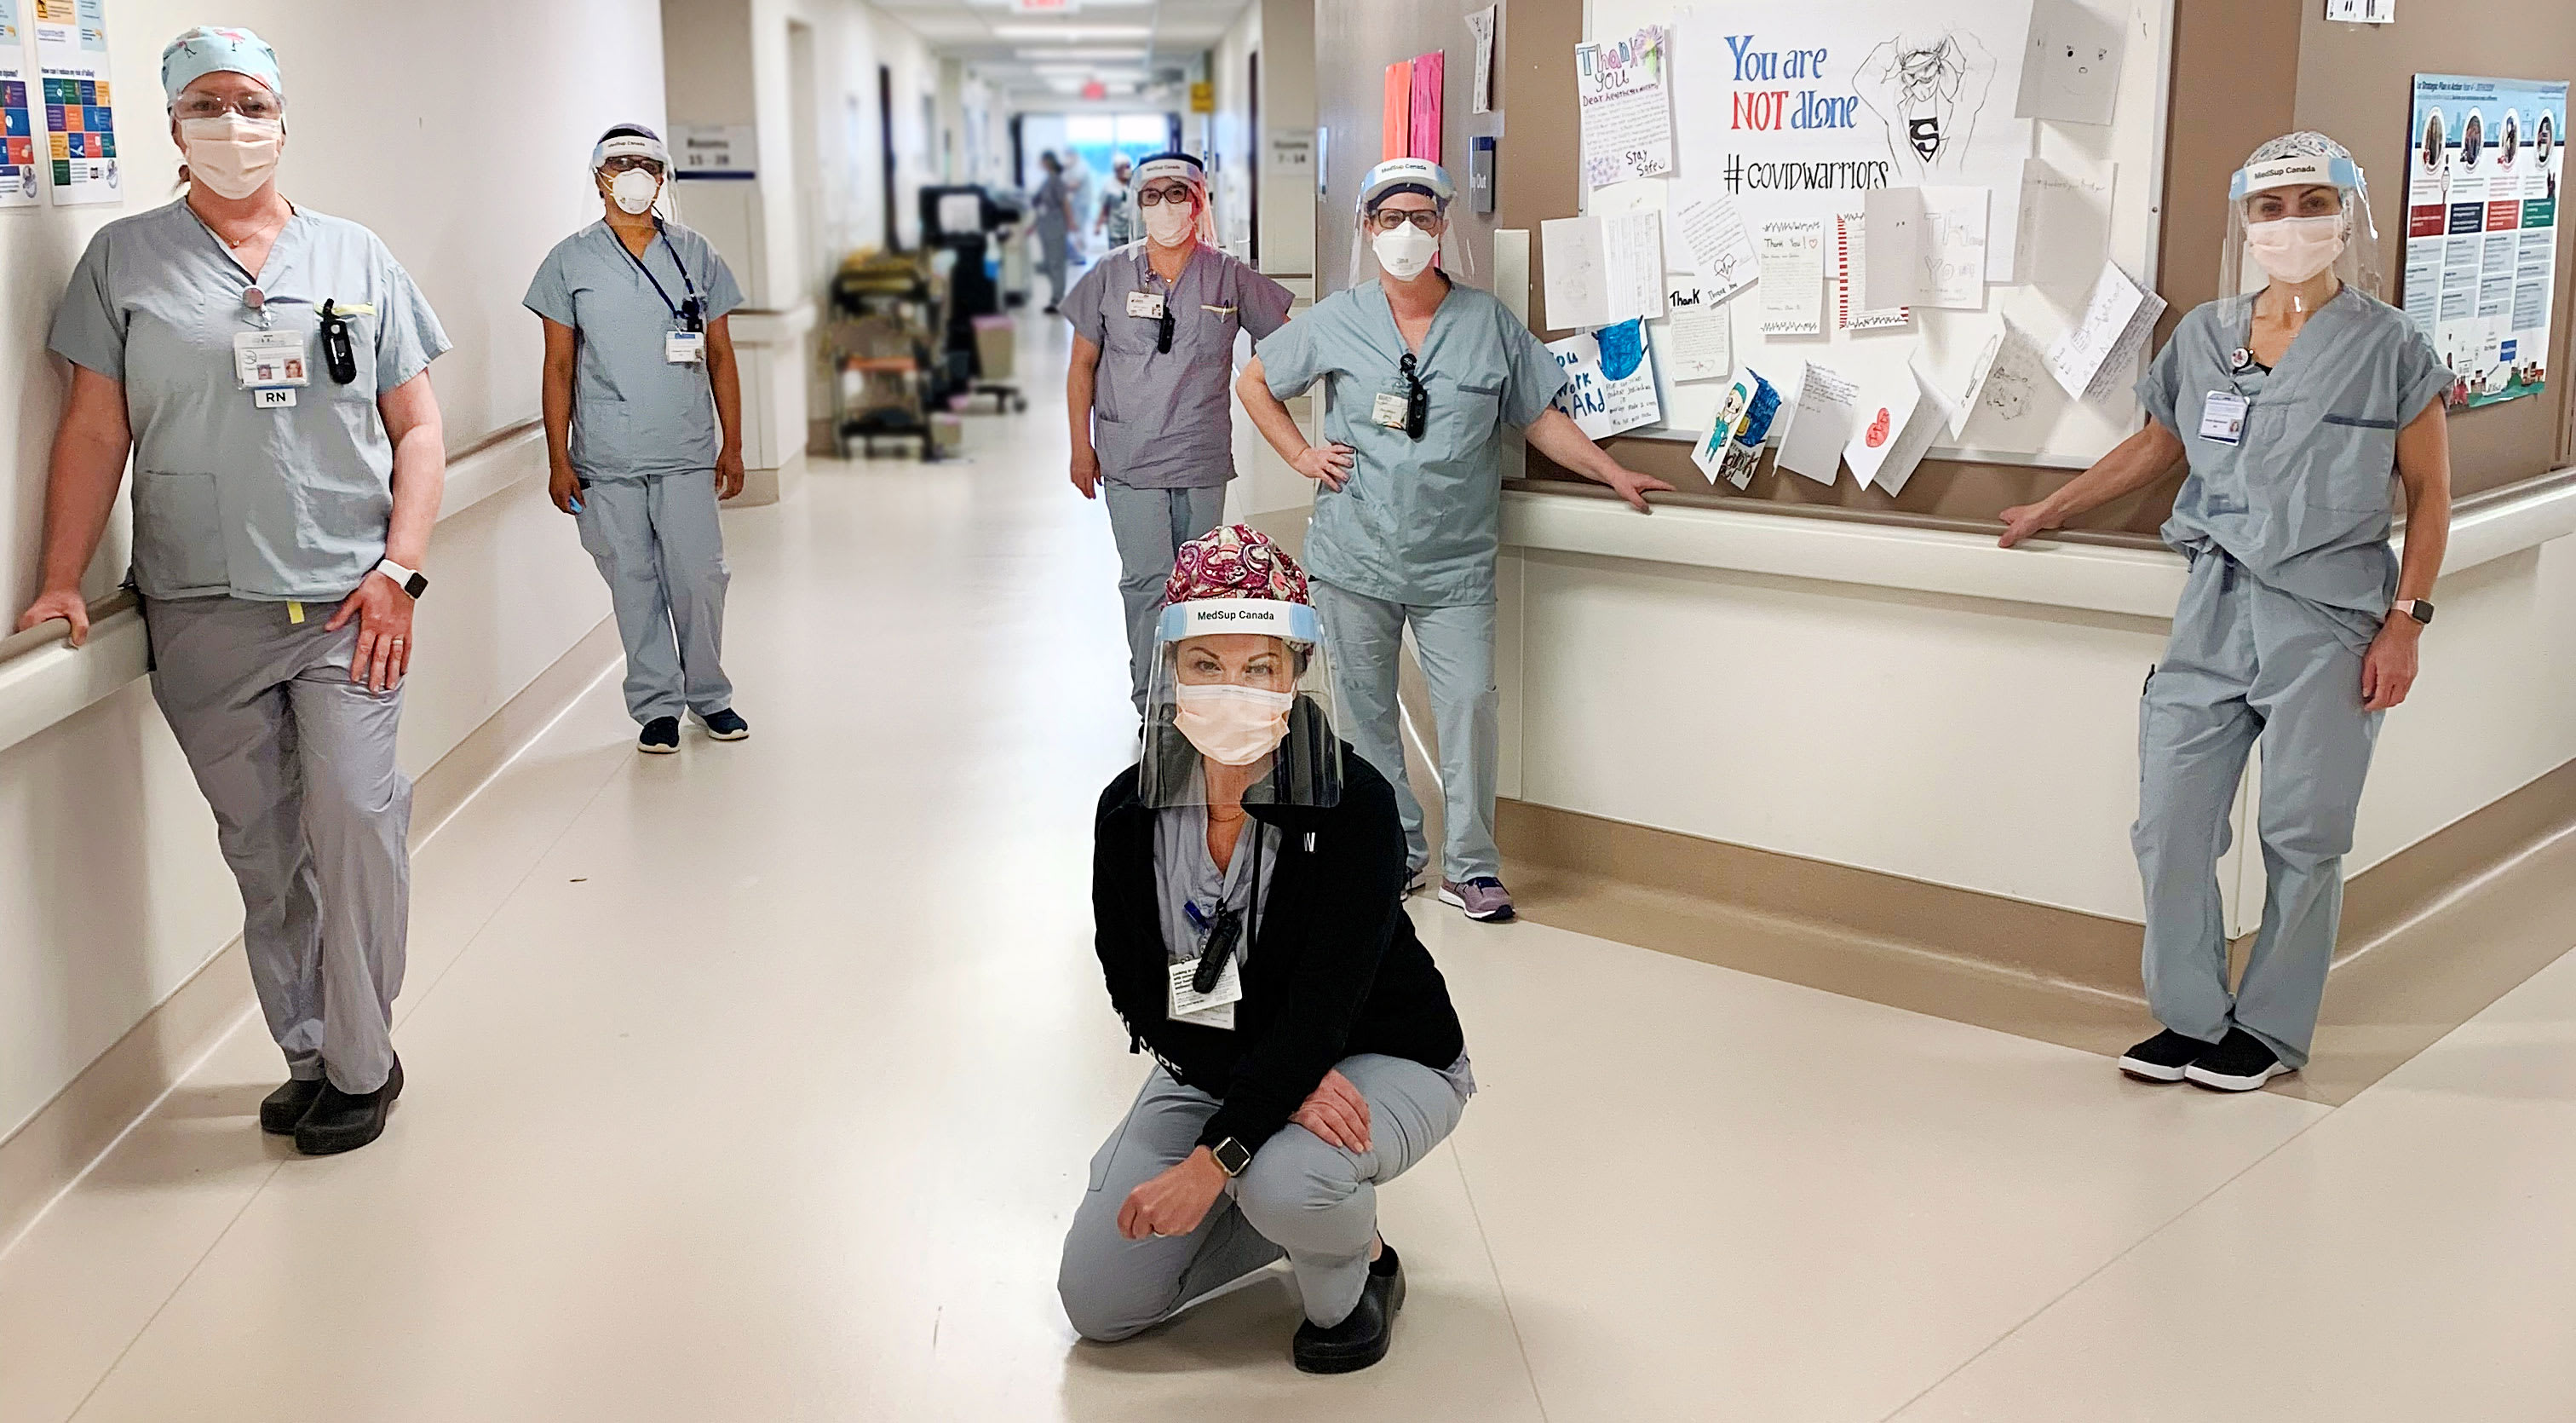 INSIDE THE ICU: ‘This is unlike anything I have ever seen”